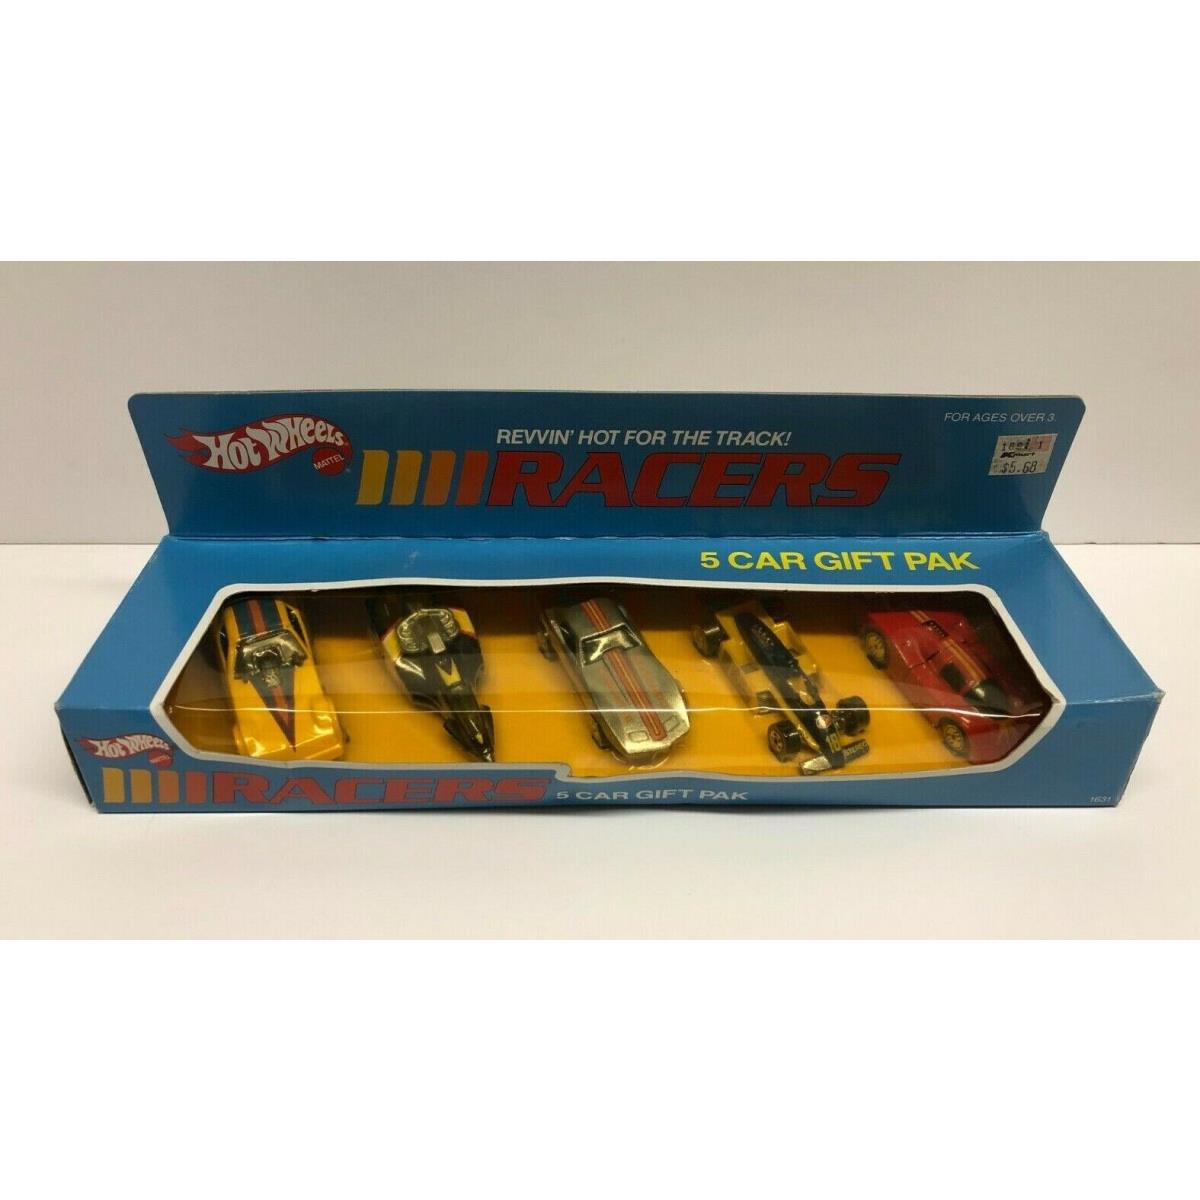 Vintage 1985 Hot Wheels Racers Gift Pak 5-cars 1631 Beautiful Condition